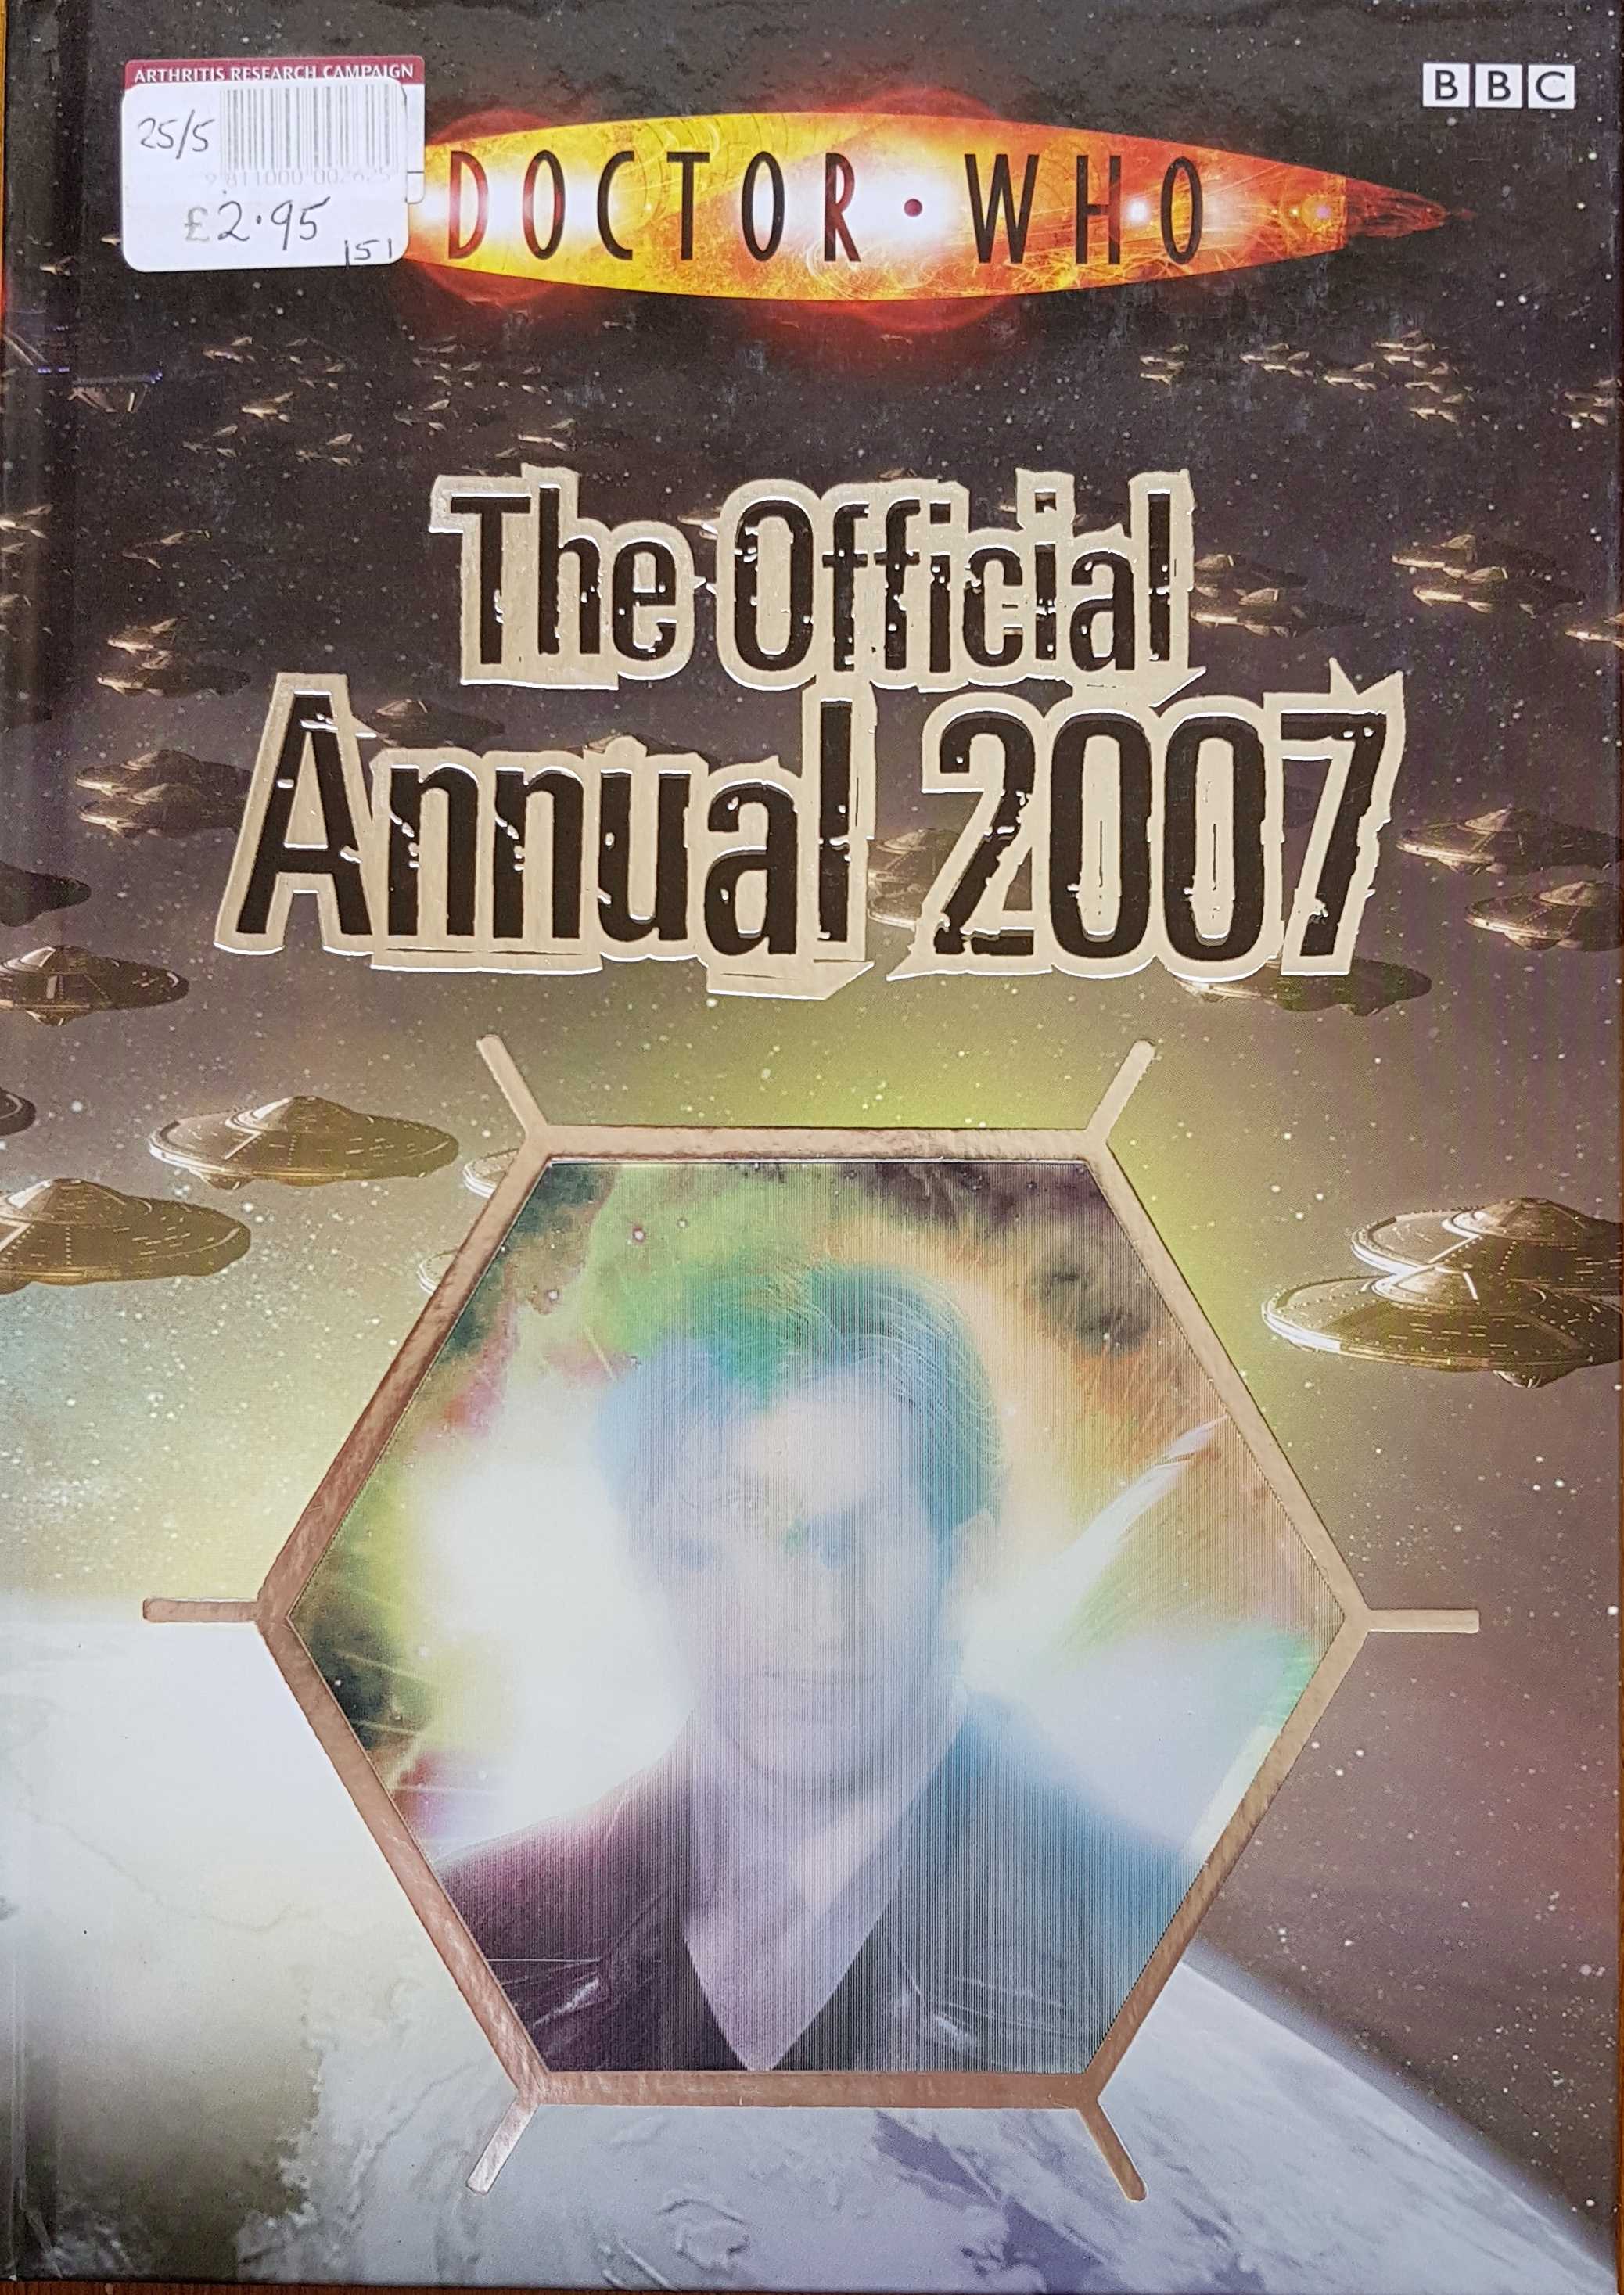 Picture of 1-405-90199-3 Doctor Who - The official annual 2007 by artist Various from the BBC records and Tapes library